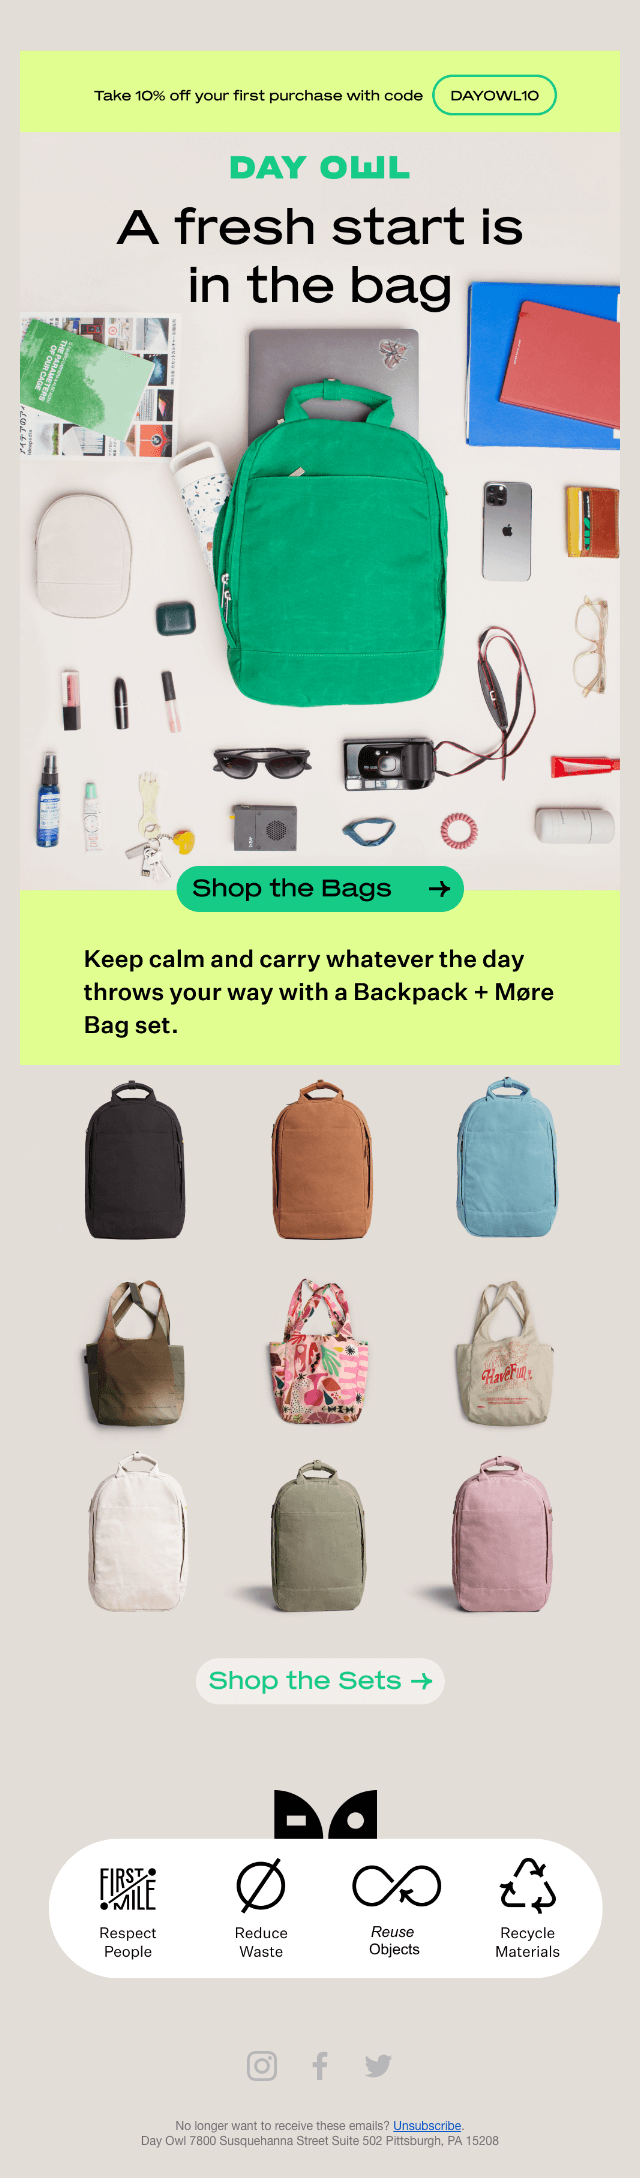 Image shows a back-to-school email from DayOwl, with images that indicate a school shopping list